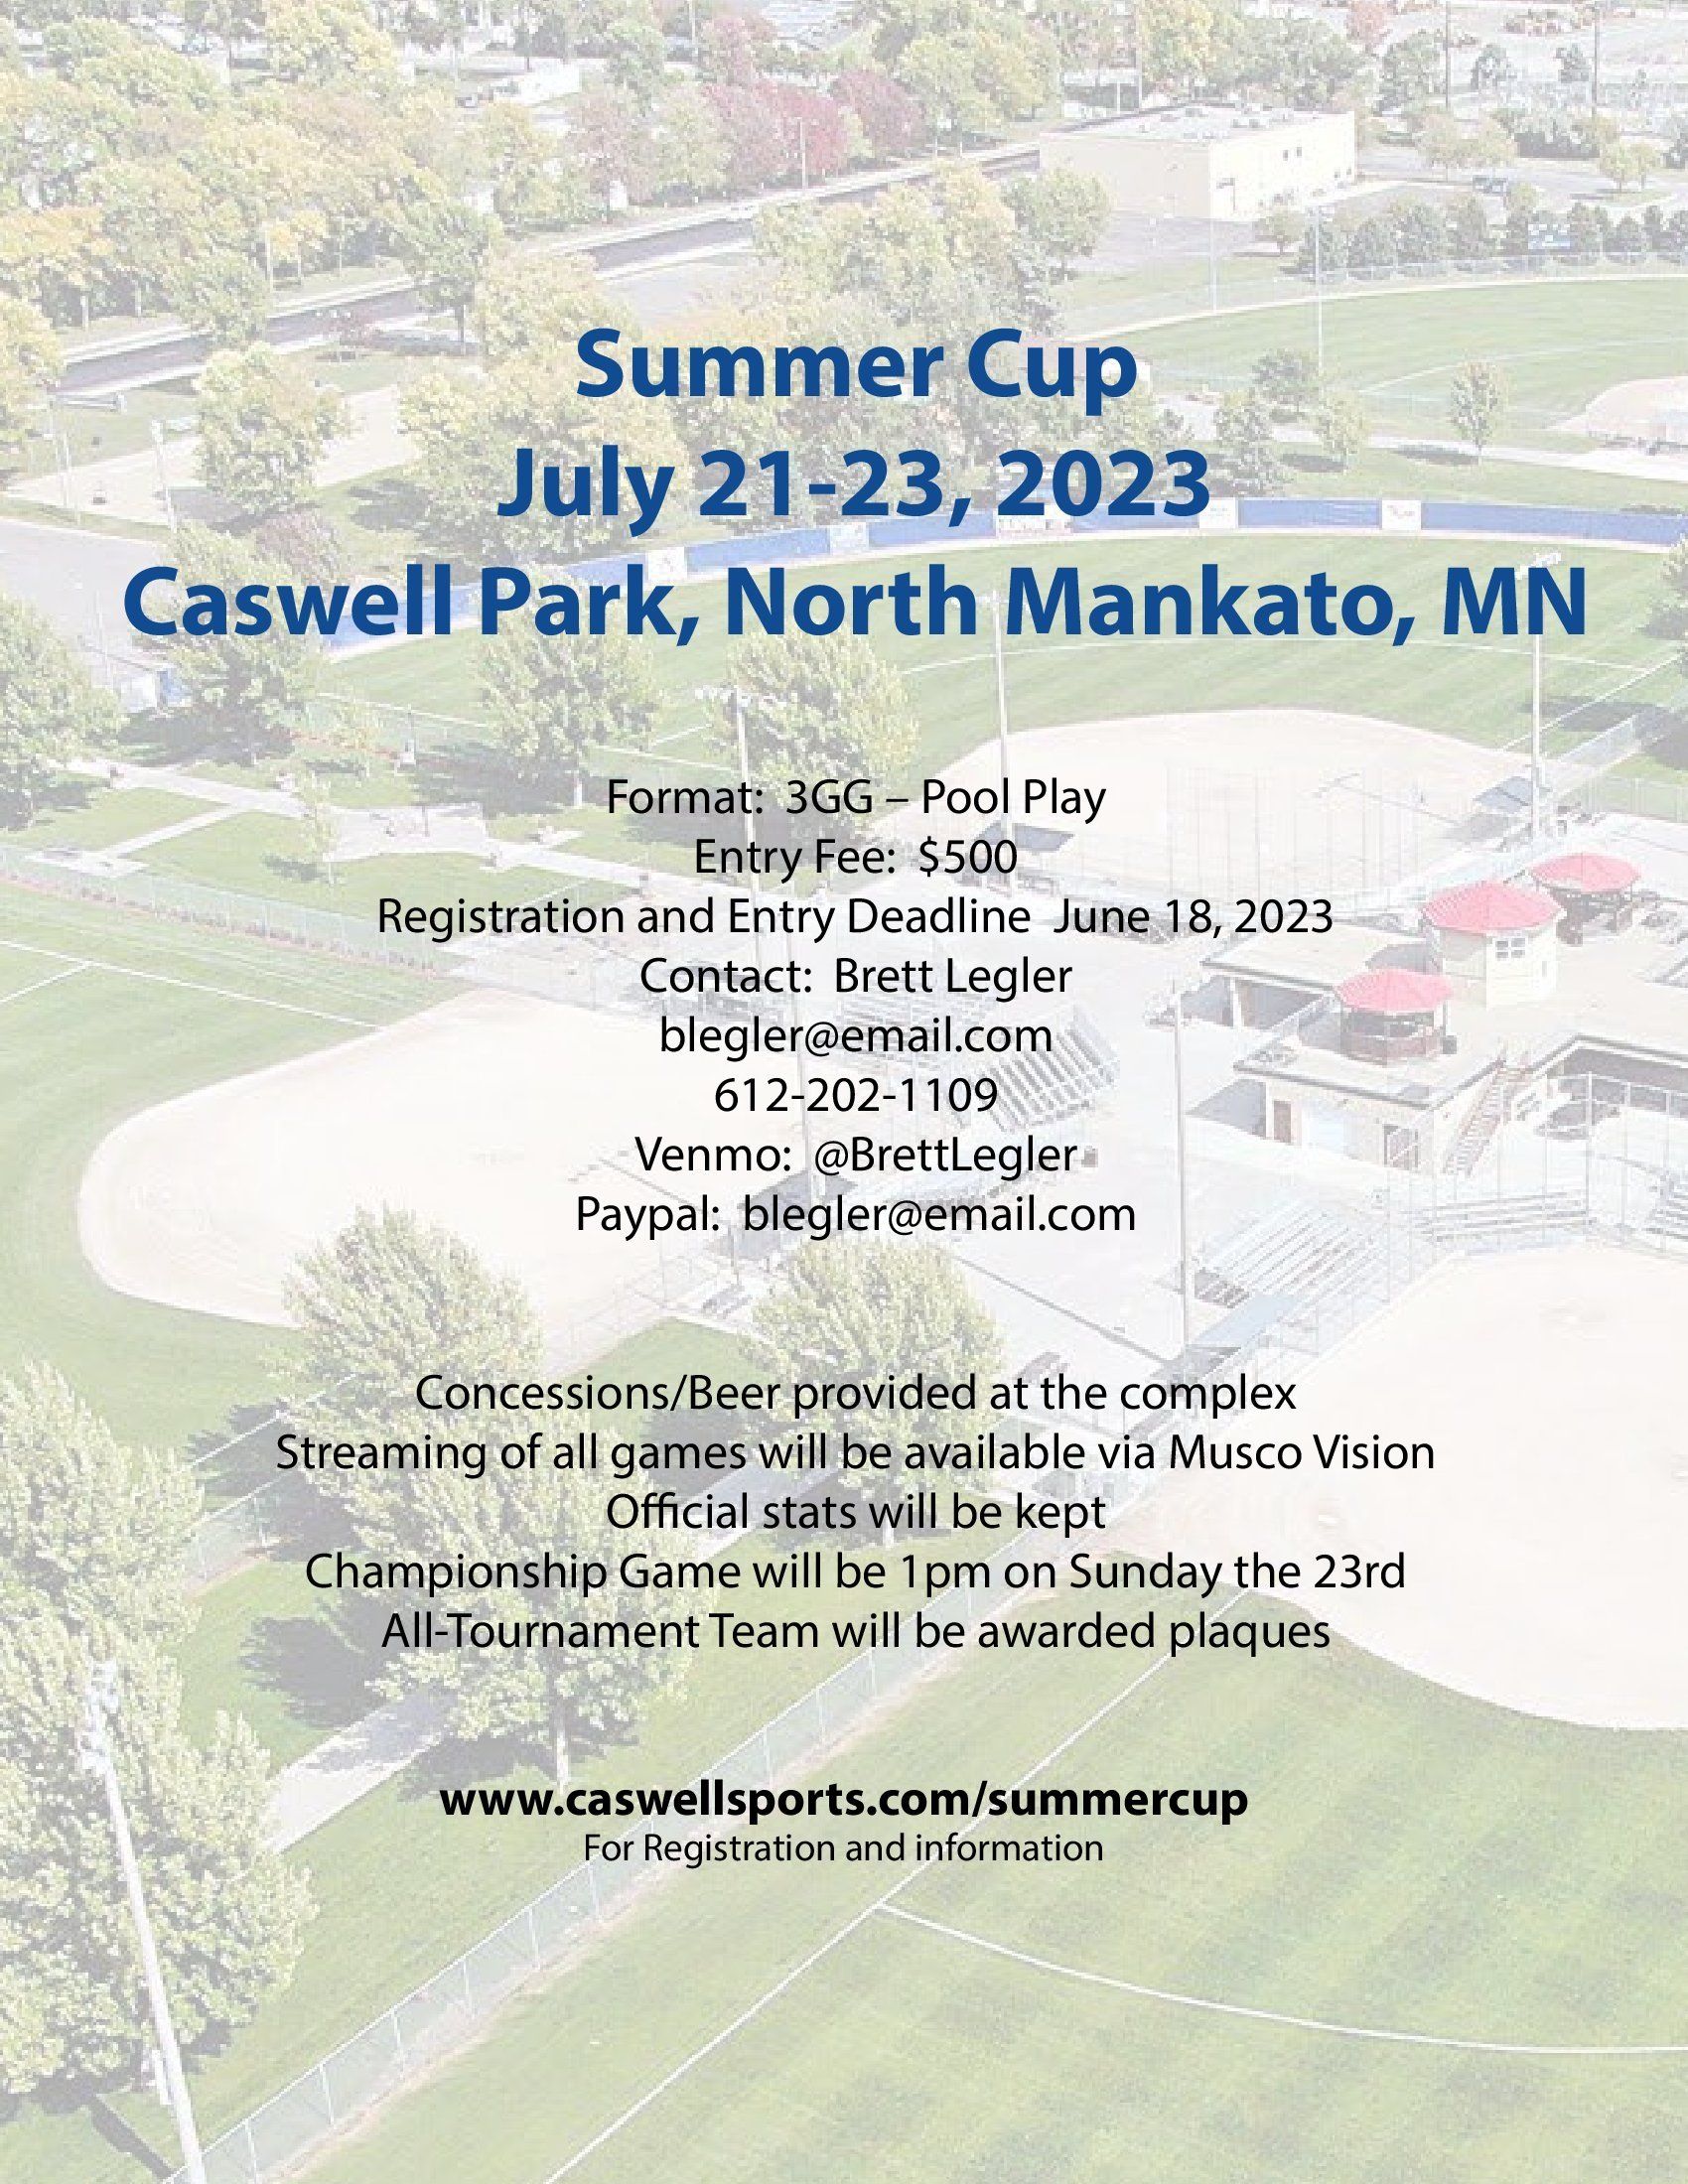 Summer Cup at Caswell Park in North Mankato July 2123, 2023